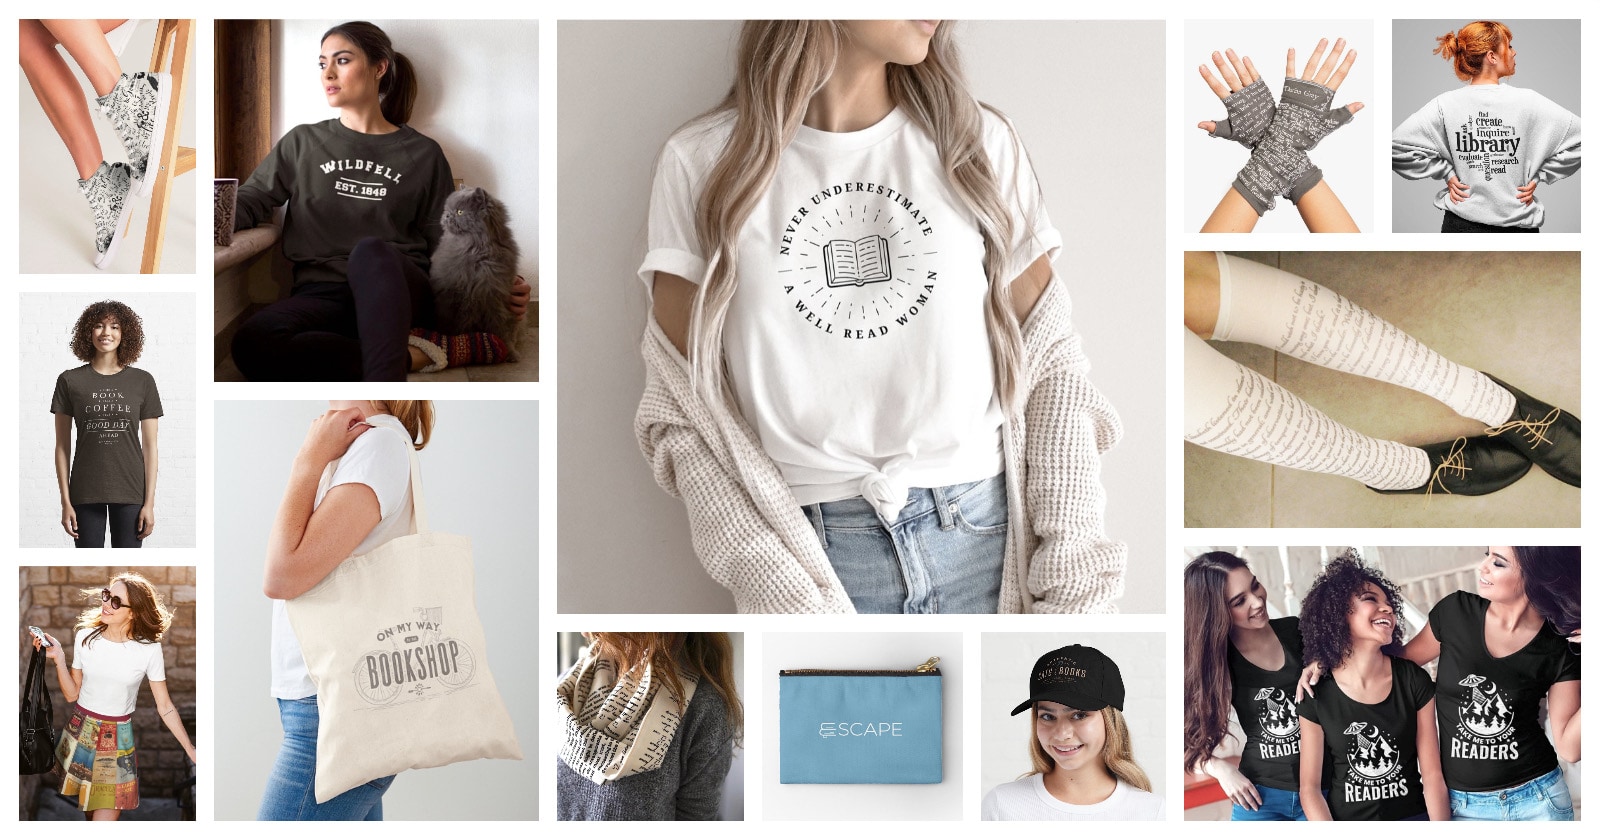 50 neat literary clothes and other fashion items